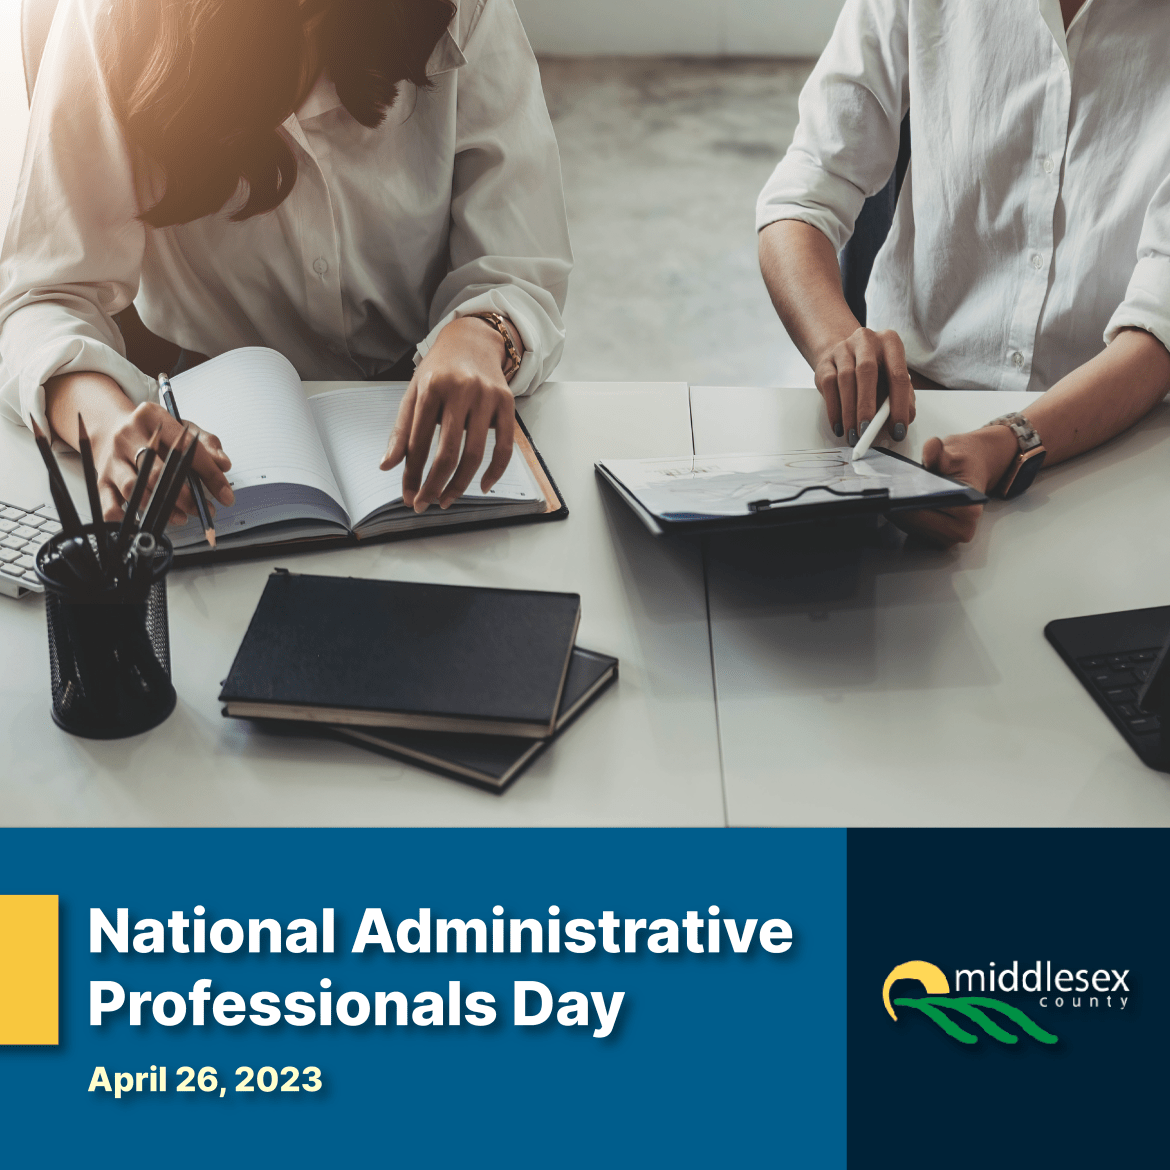 National Administrative Professionals Day 